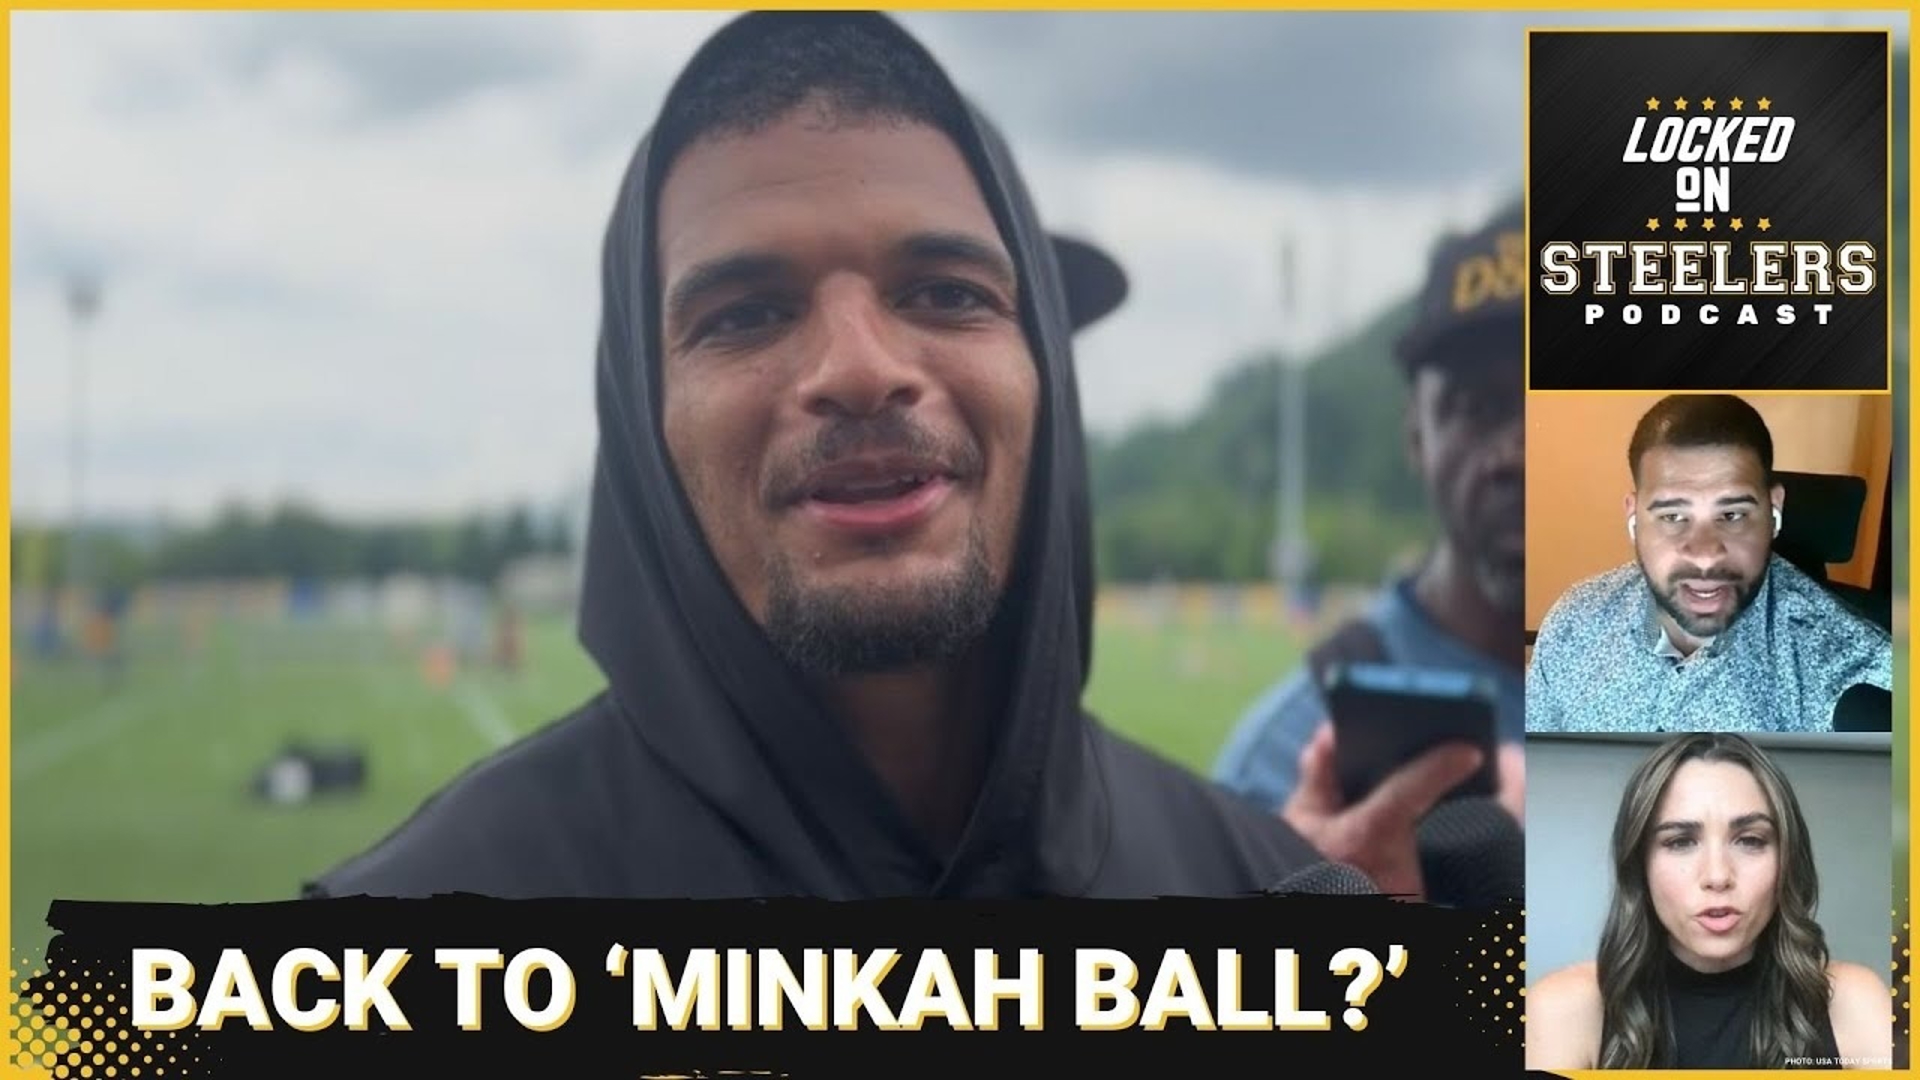 The Pittsburgh Steelers ended OTAs Thursday, and Minkah Fitzpatrick spoke about how the team could get back to play what he calls "Minkah ball."